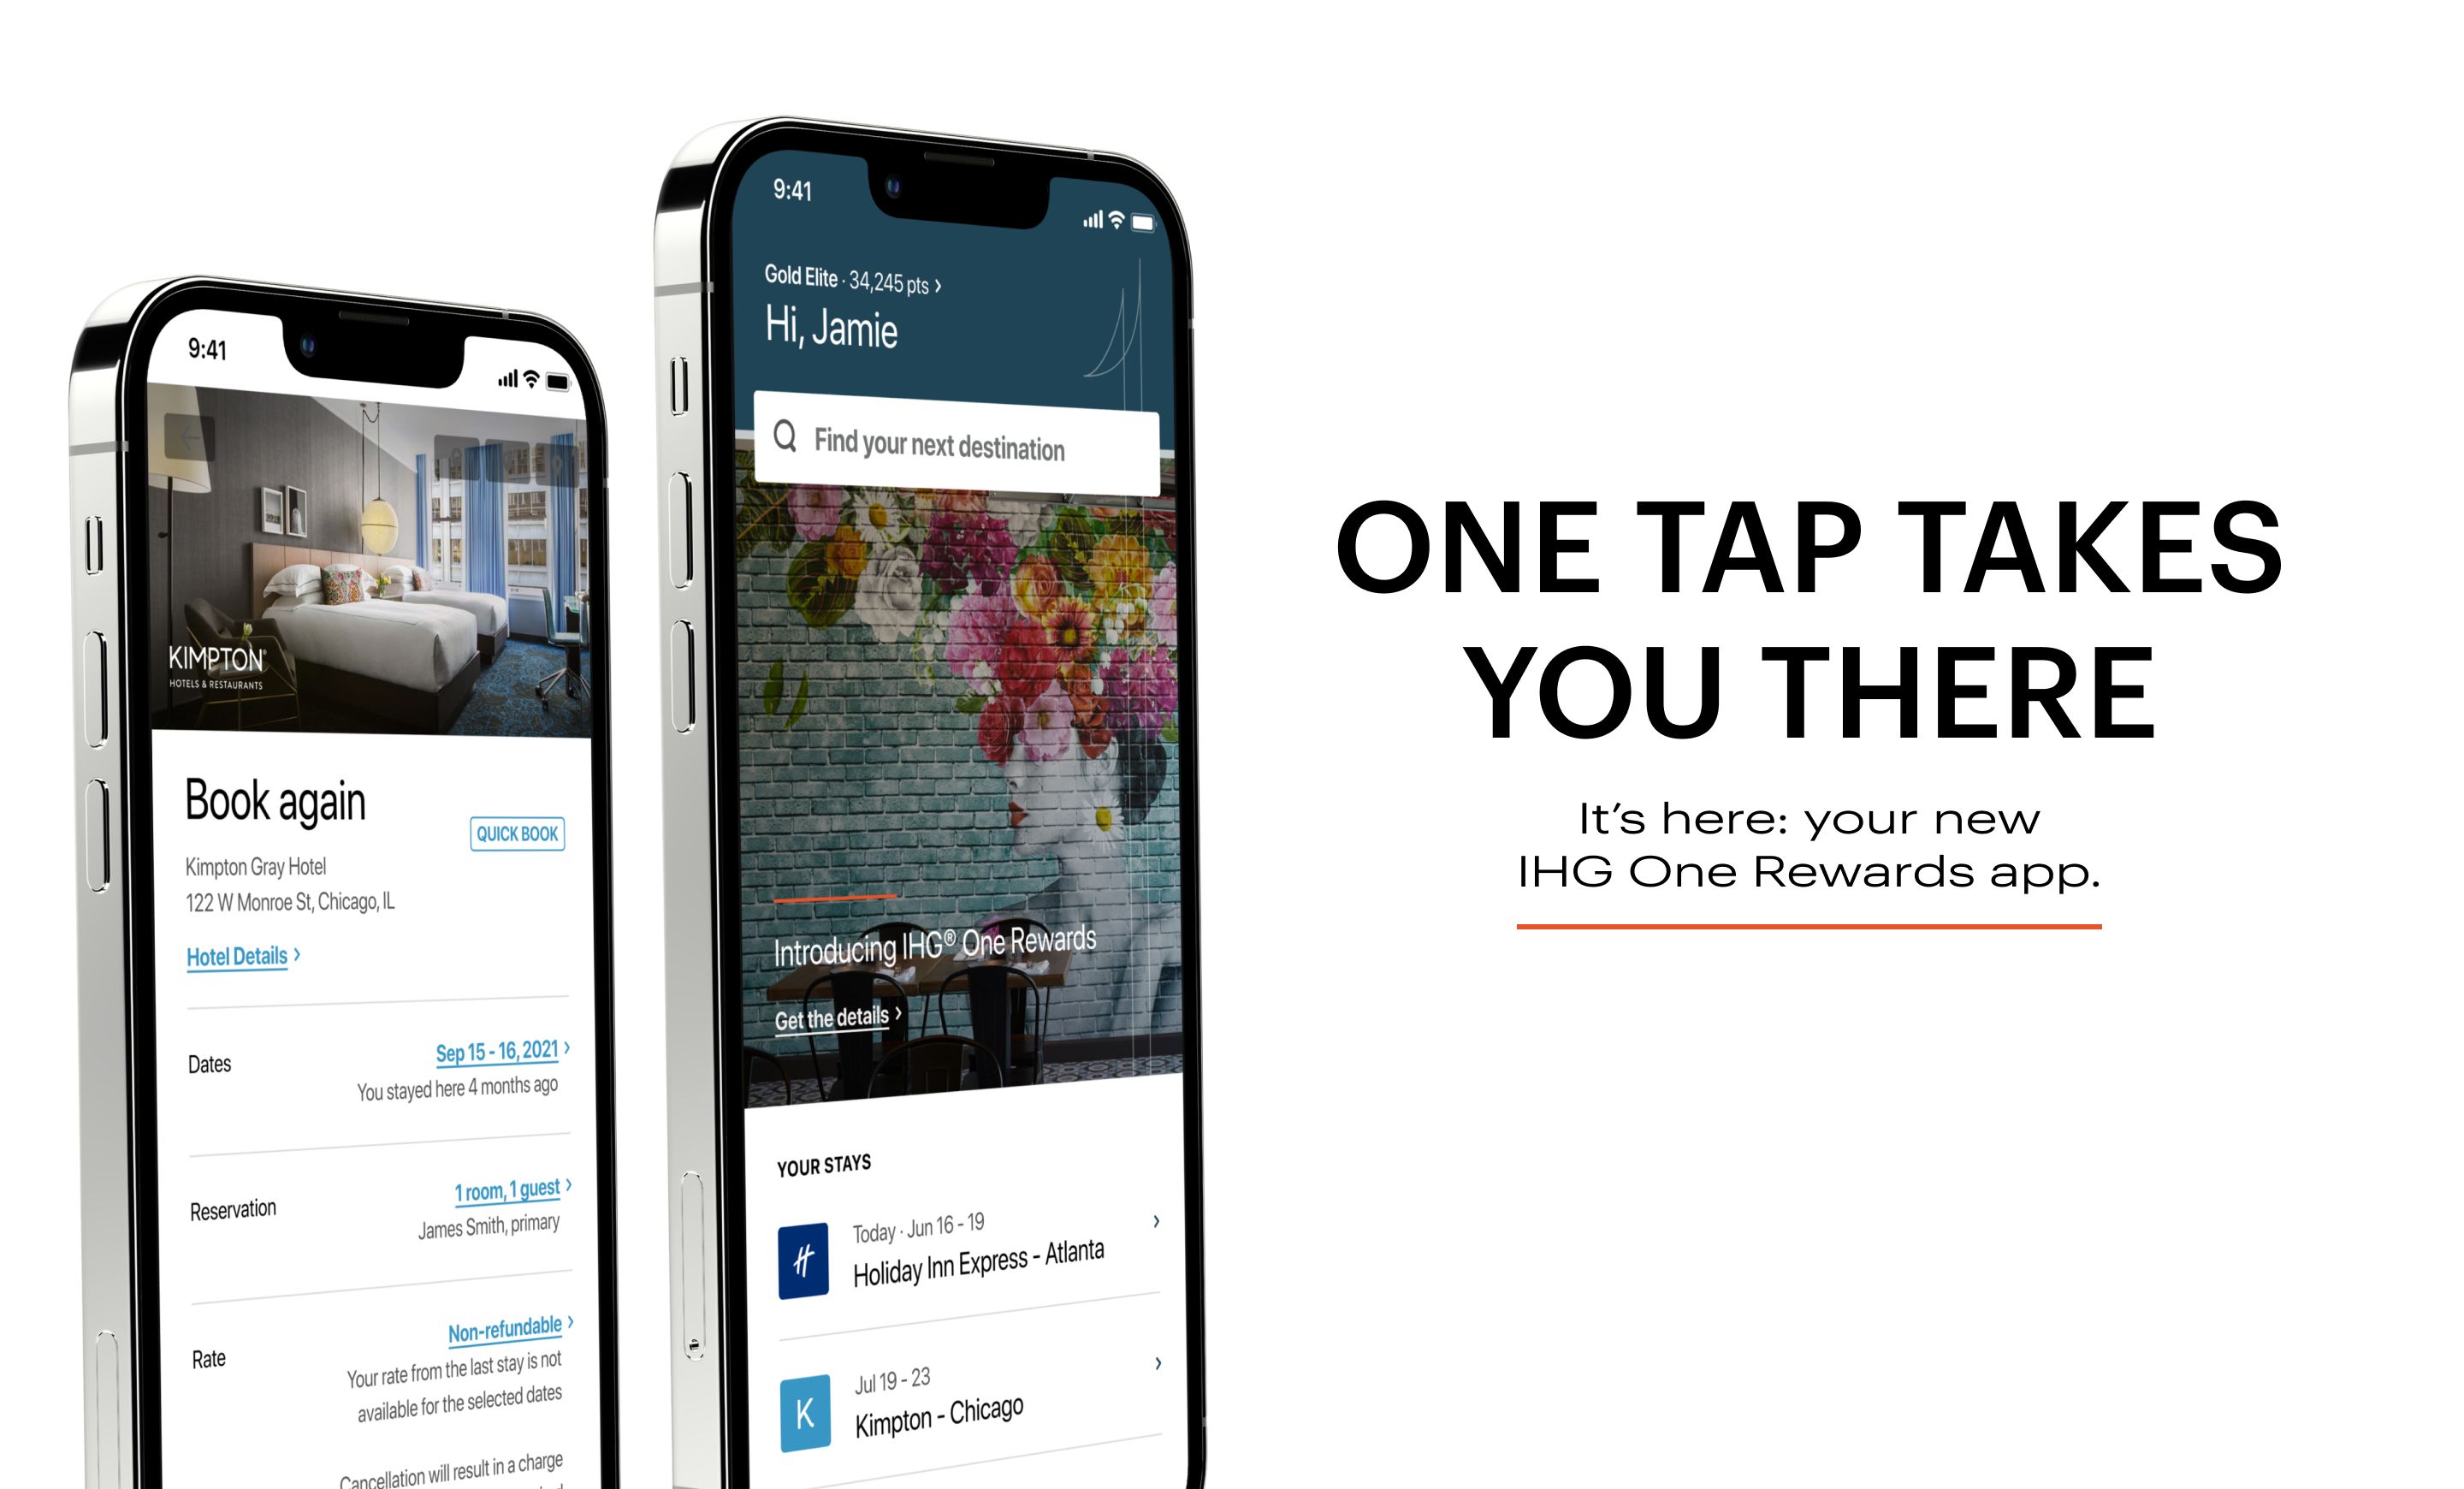 ONE TAP TAKES YOU THERE  It's here: your new IHG One Rewards app.